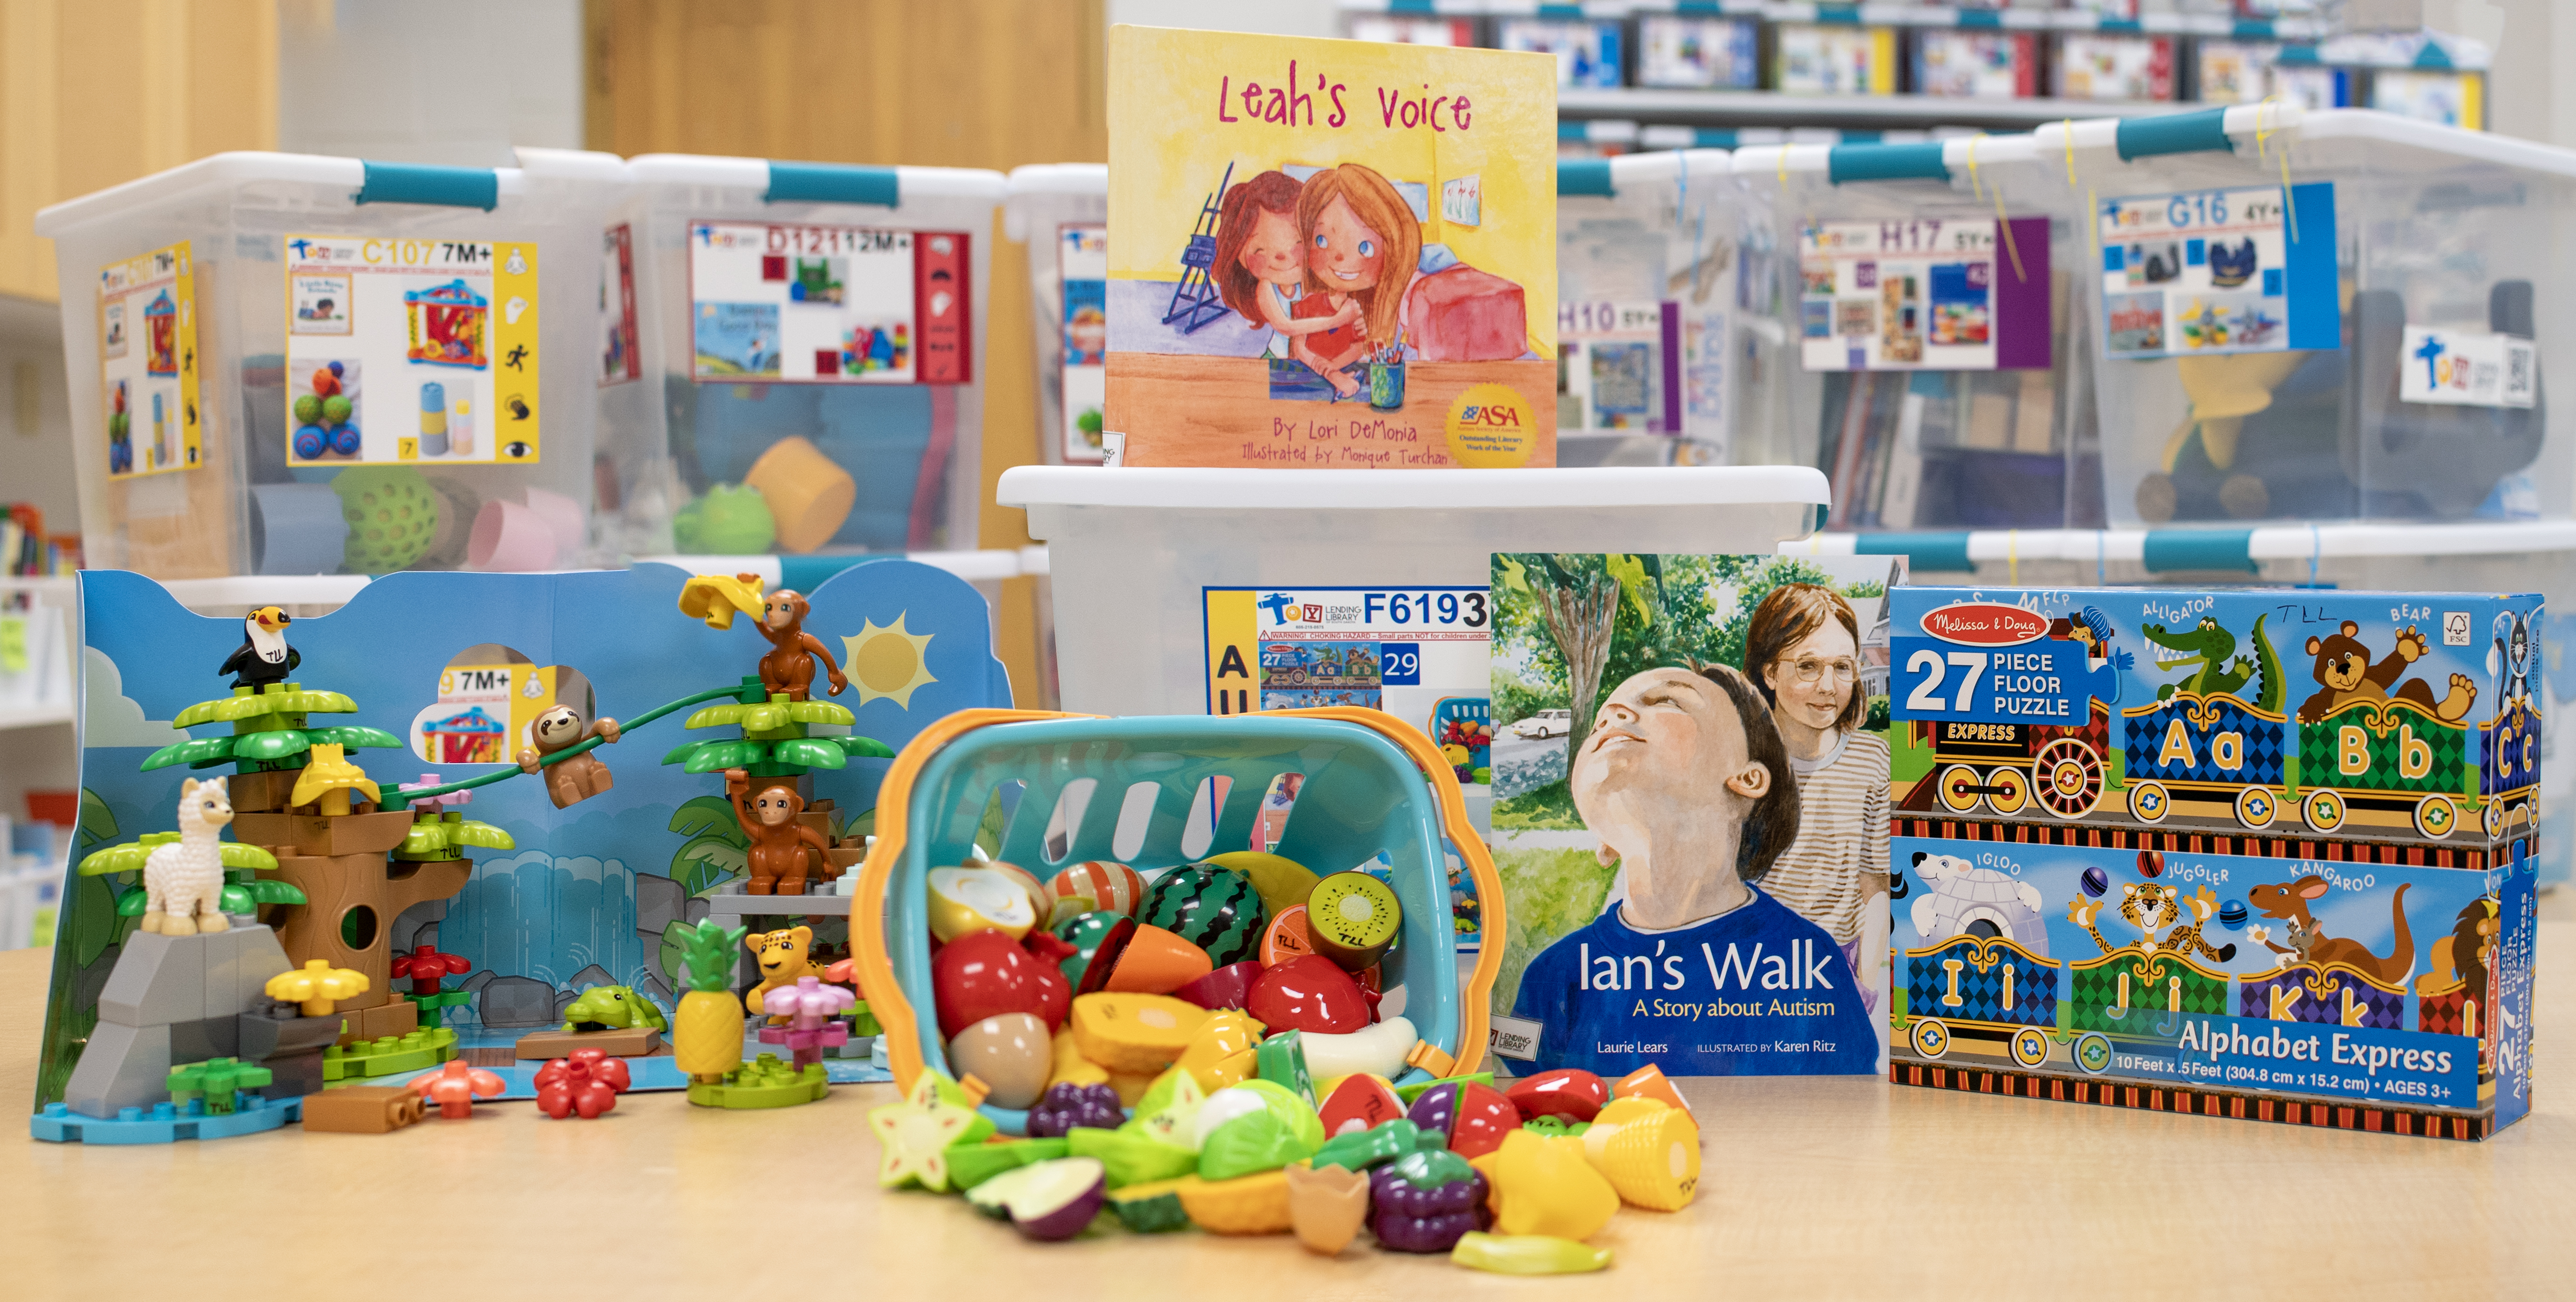 Toy Lending Library Autism Inclusion Box